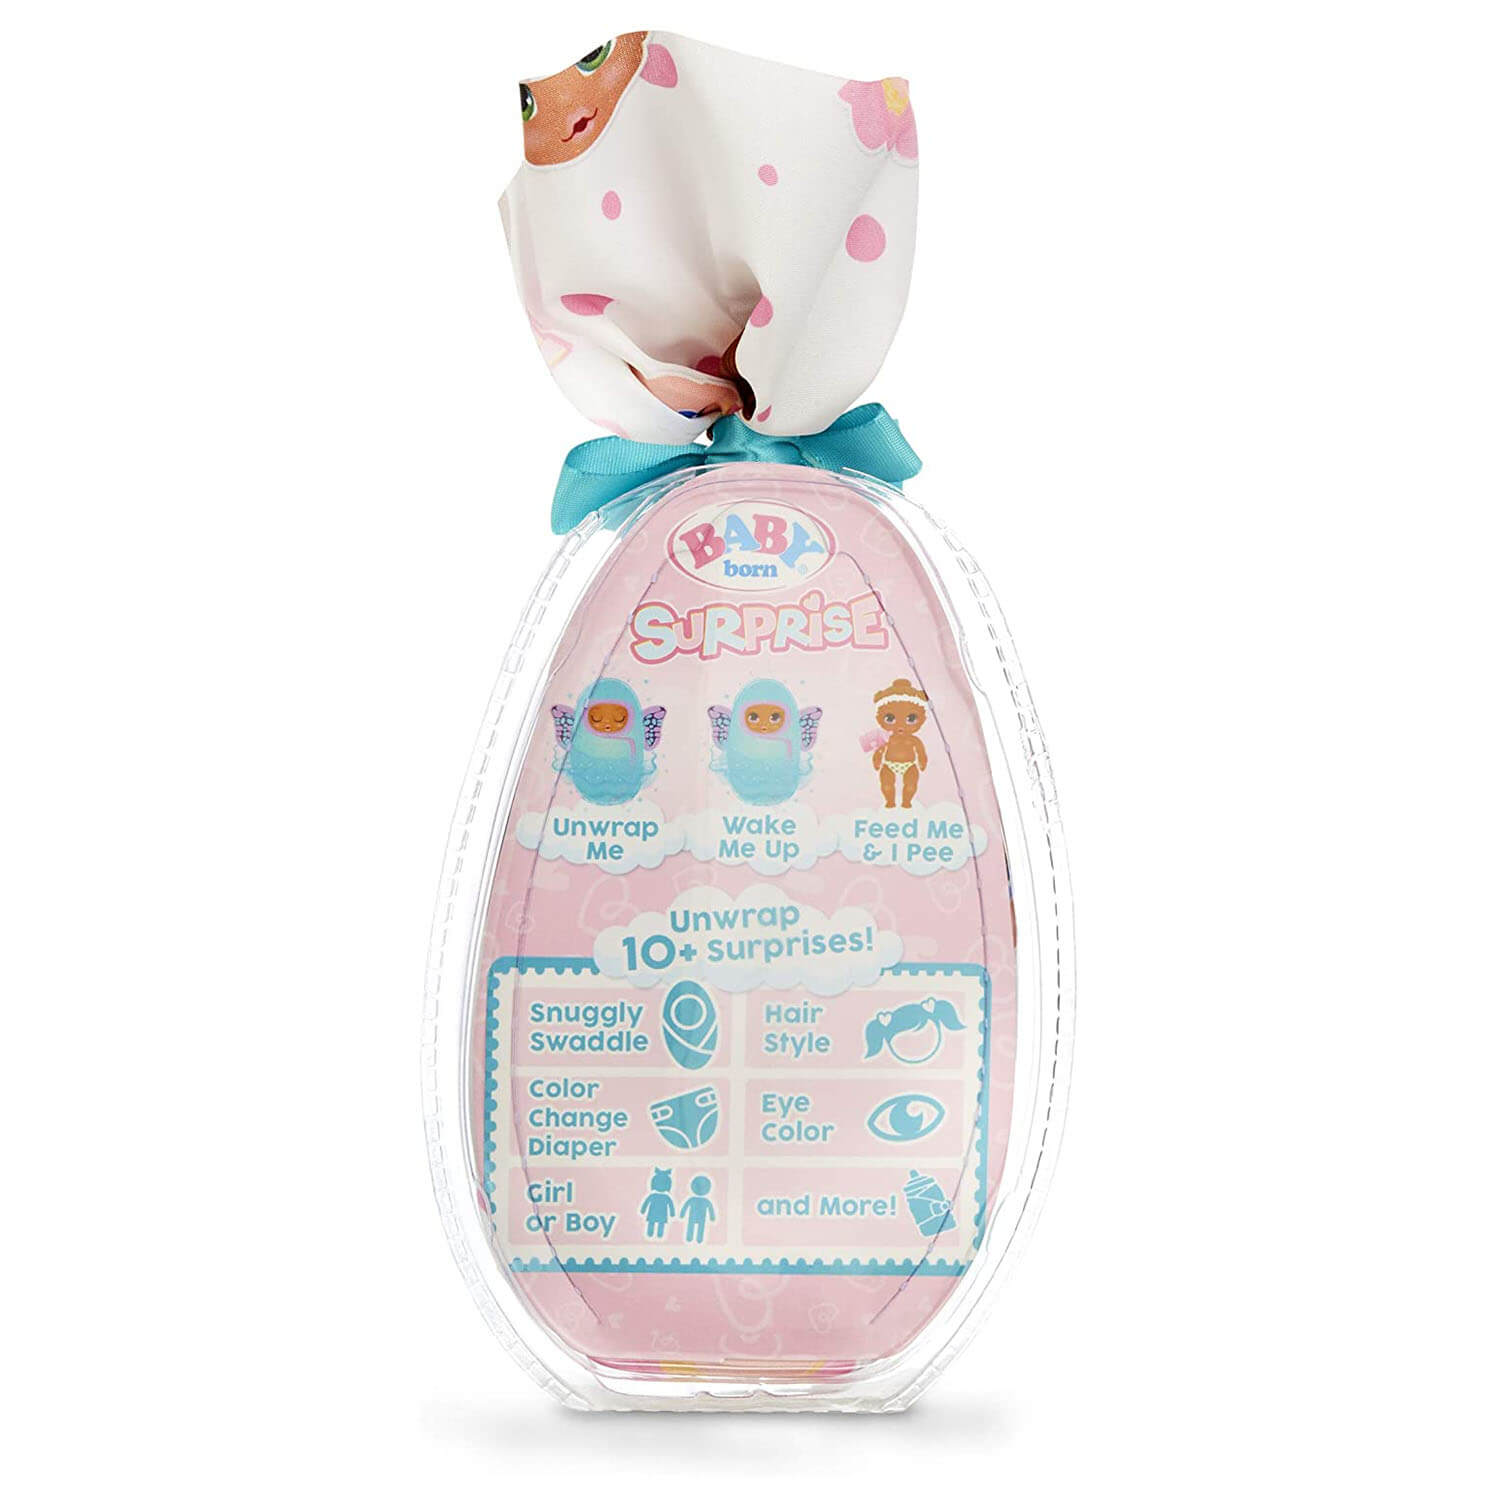 Back view of the BABY born Surprise Series 2 package.